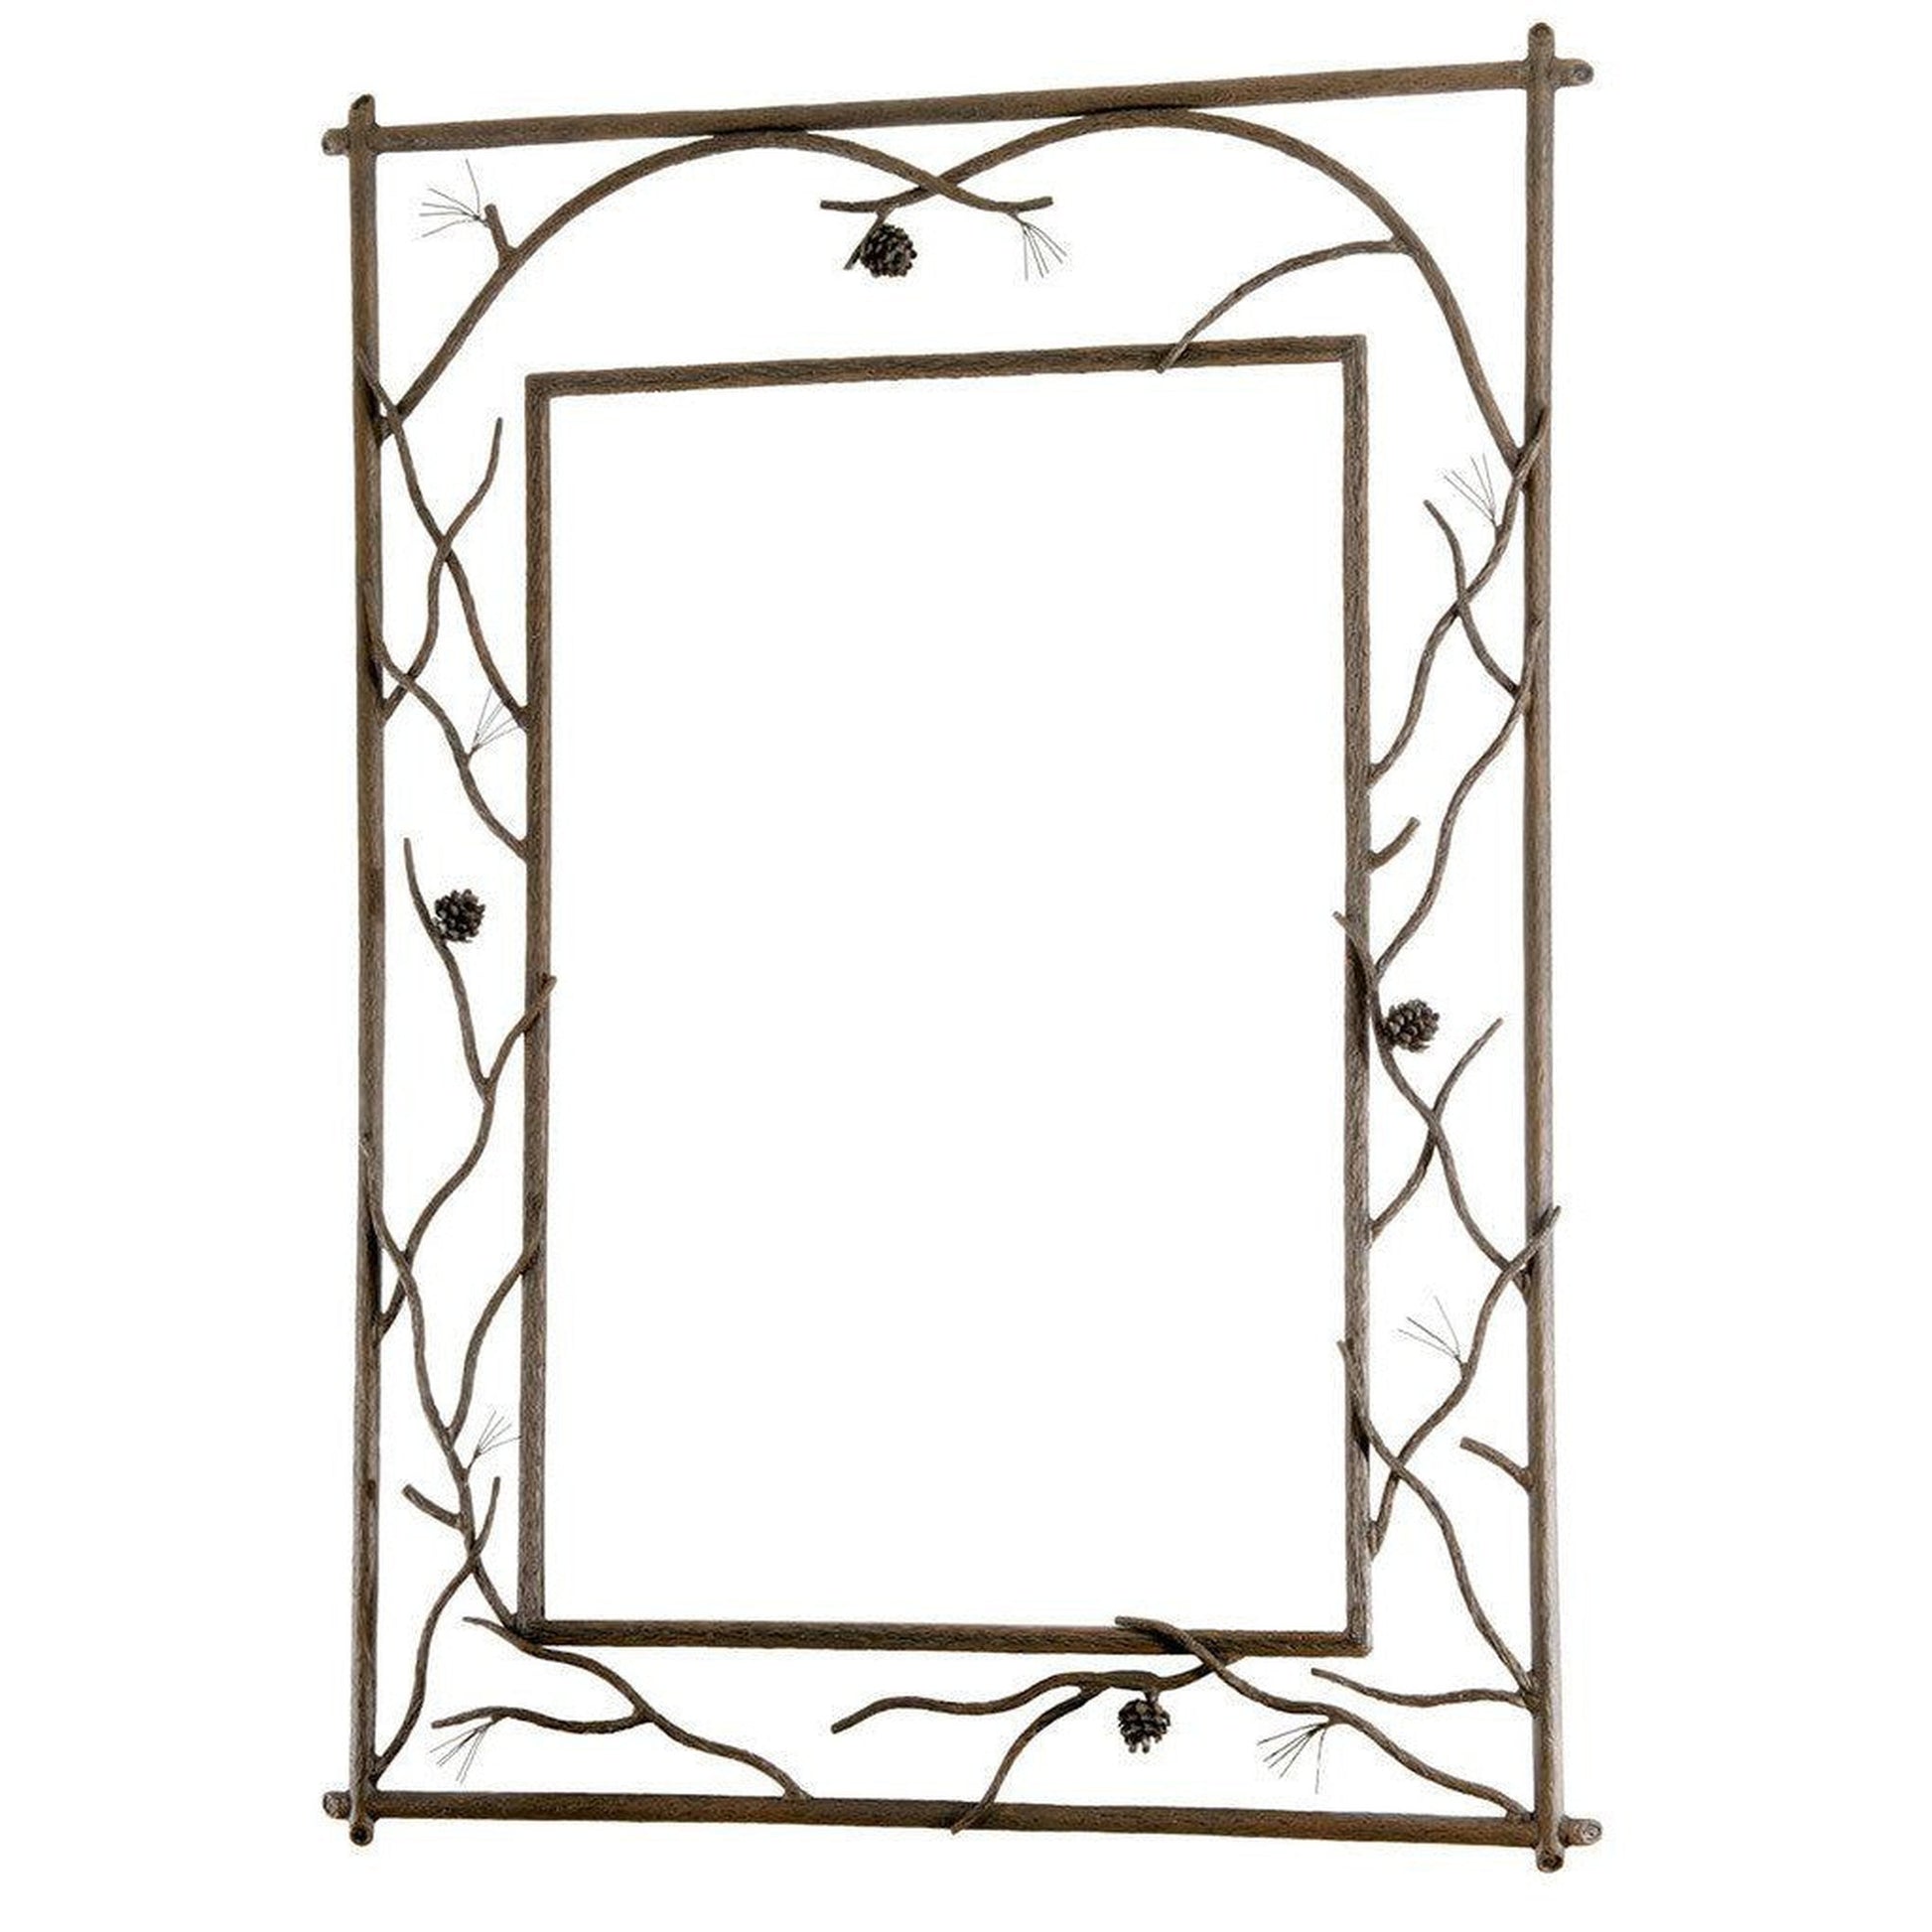 Stone County Ironworks Pine 29" x 35" Small Hand Rubbed Ivory Branched Iron Wall Mirror With Copper Iron Accent